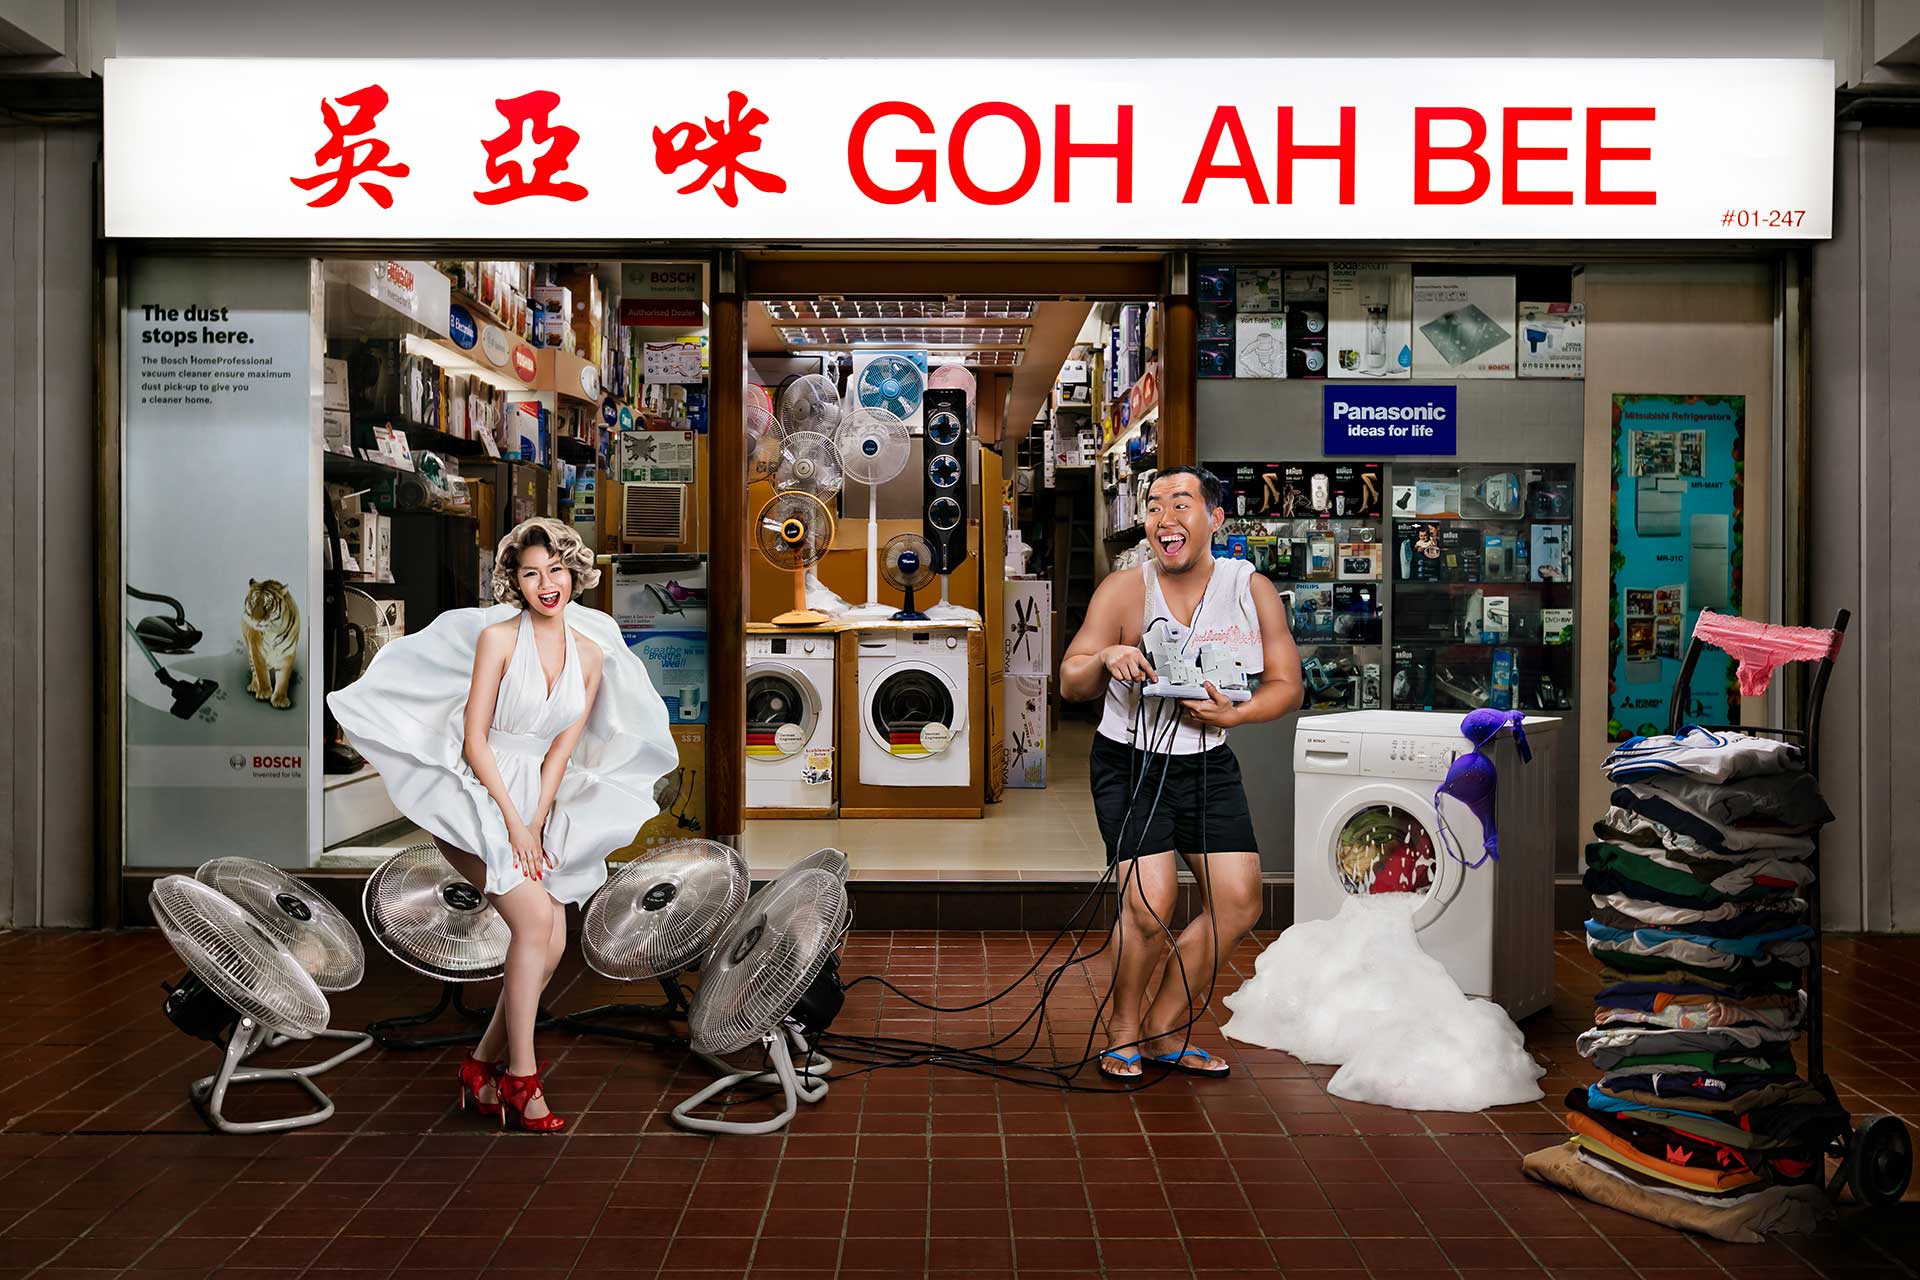 A couple posing humorously in front of a laundry shop during a creative photoshoot.